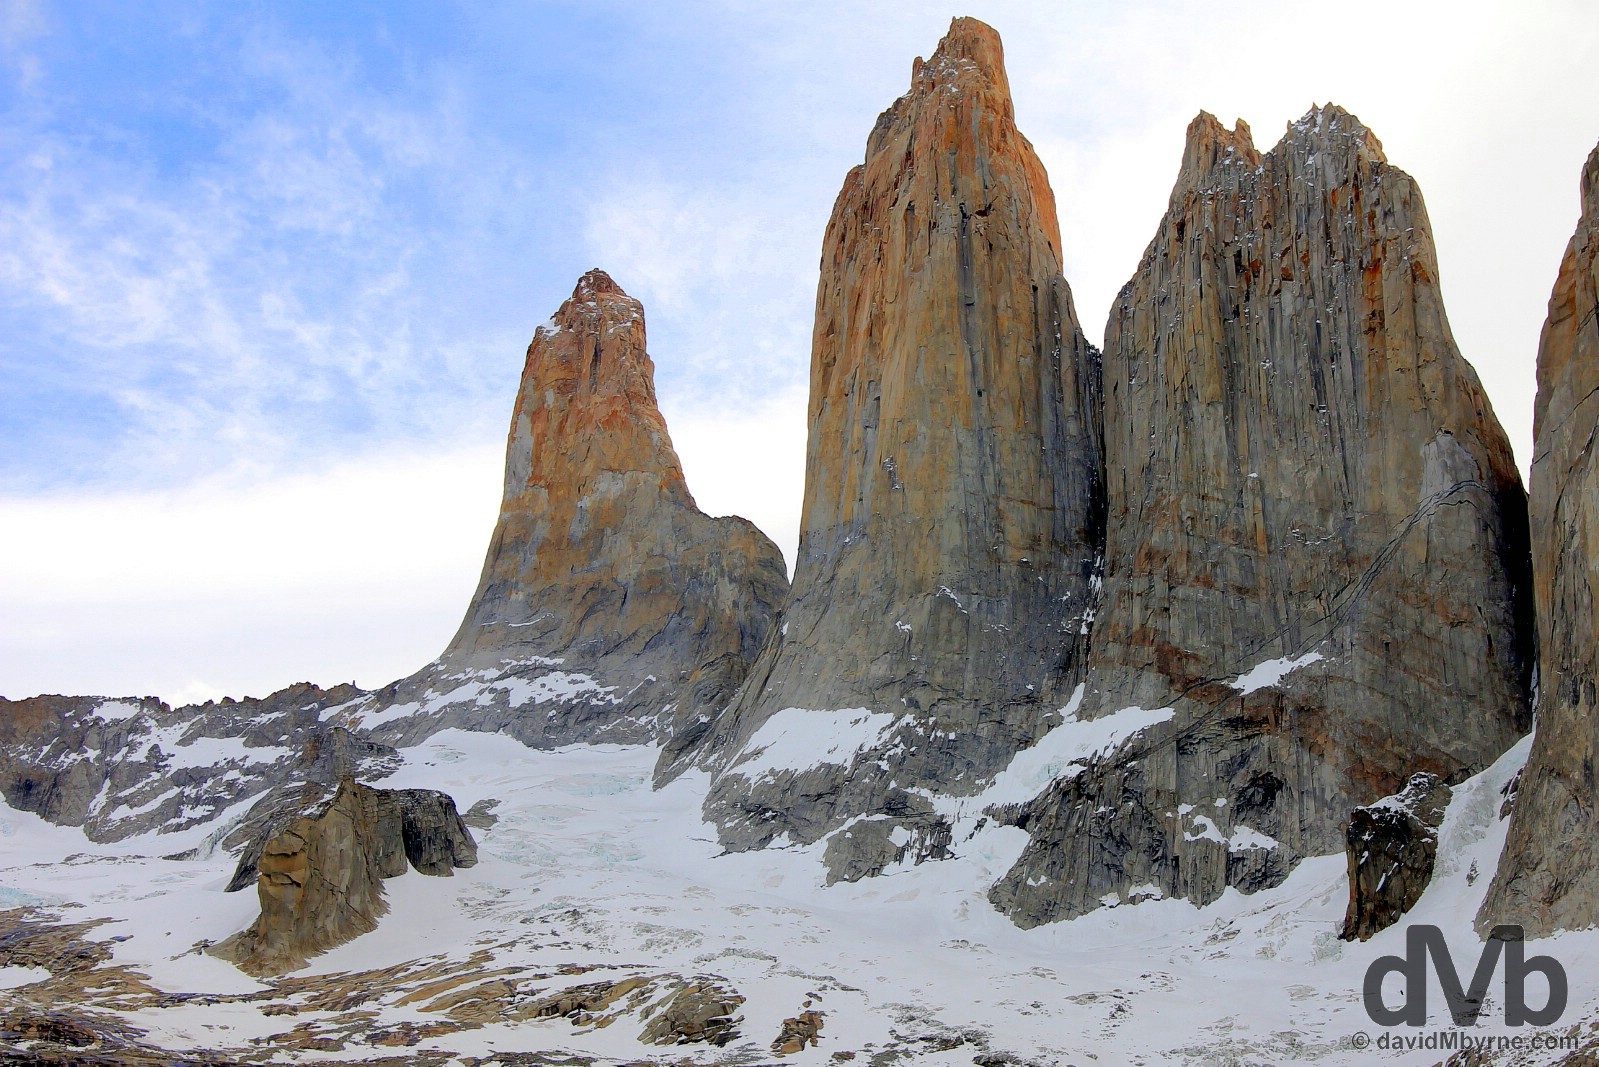 The iconic Torres del Paine, Towers of Paine, in Torres del Paine National Park, Chile. November 23, 2015.